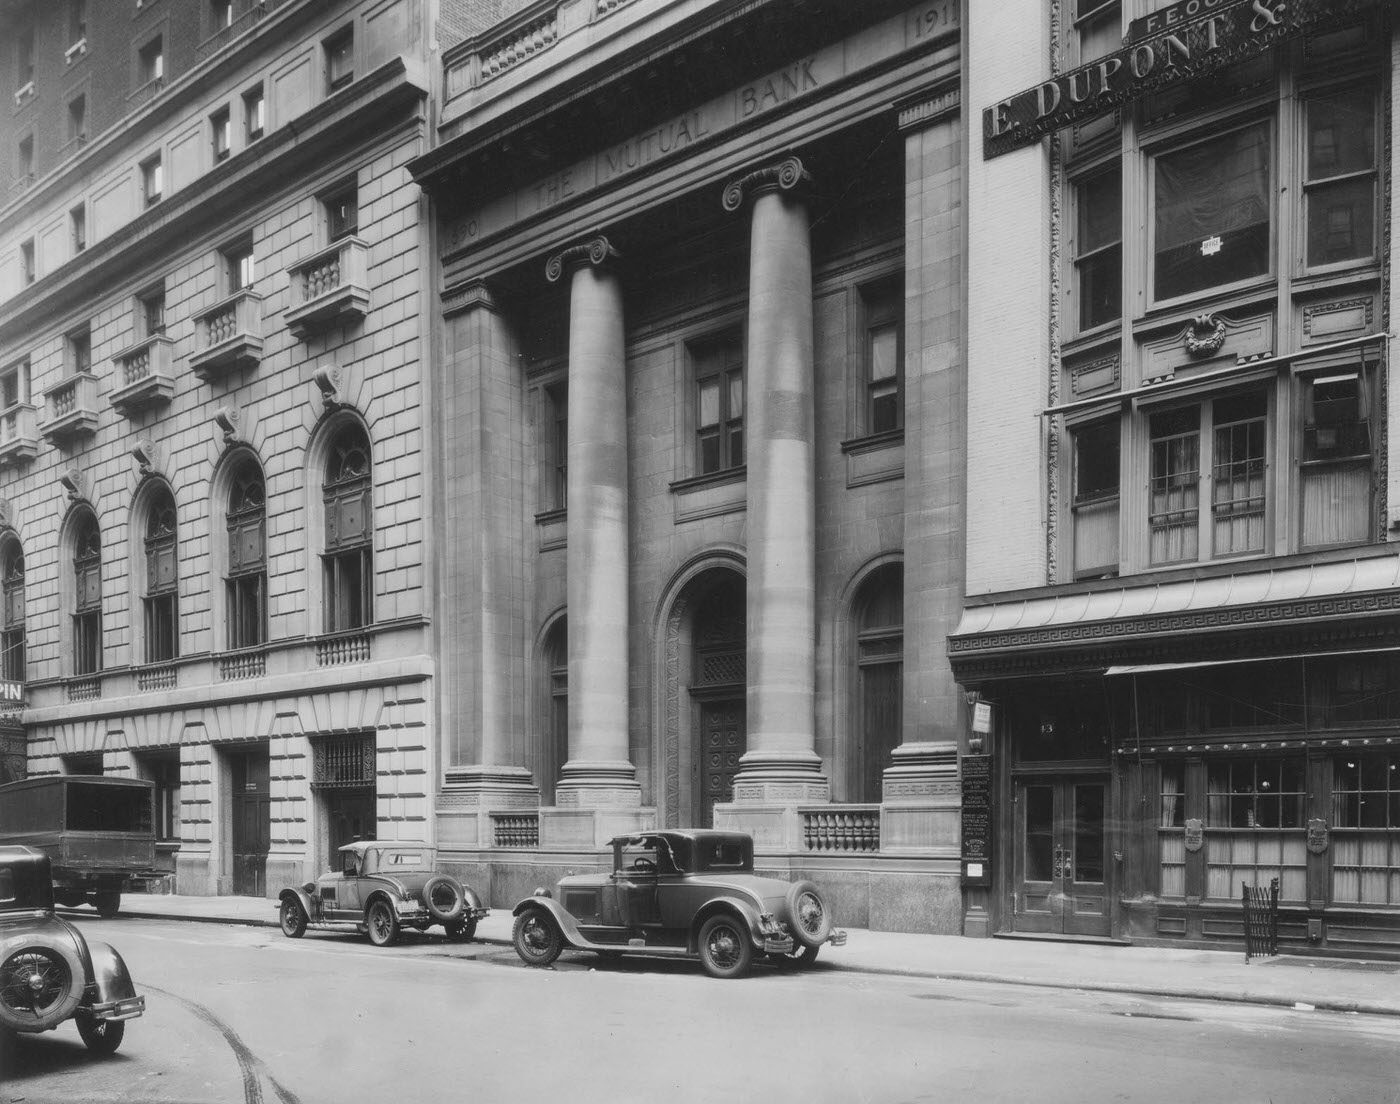 The Mutual Bank, West 33Rd Street, New York City, 1929.